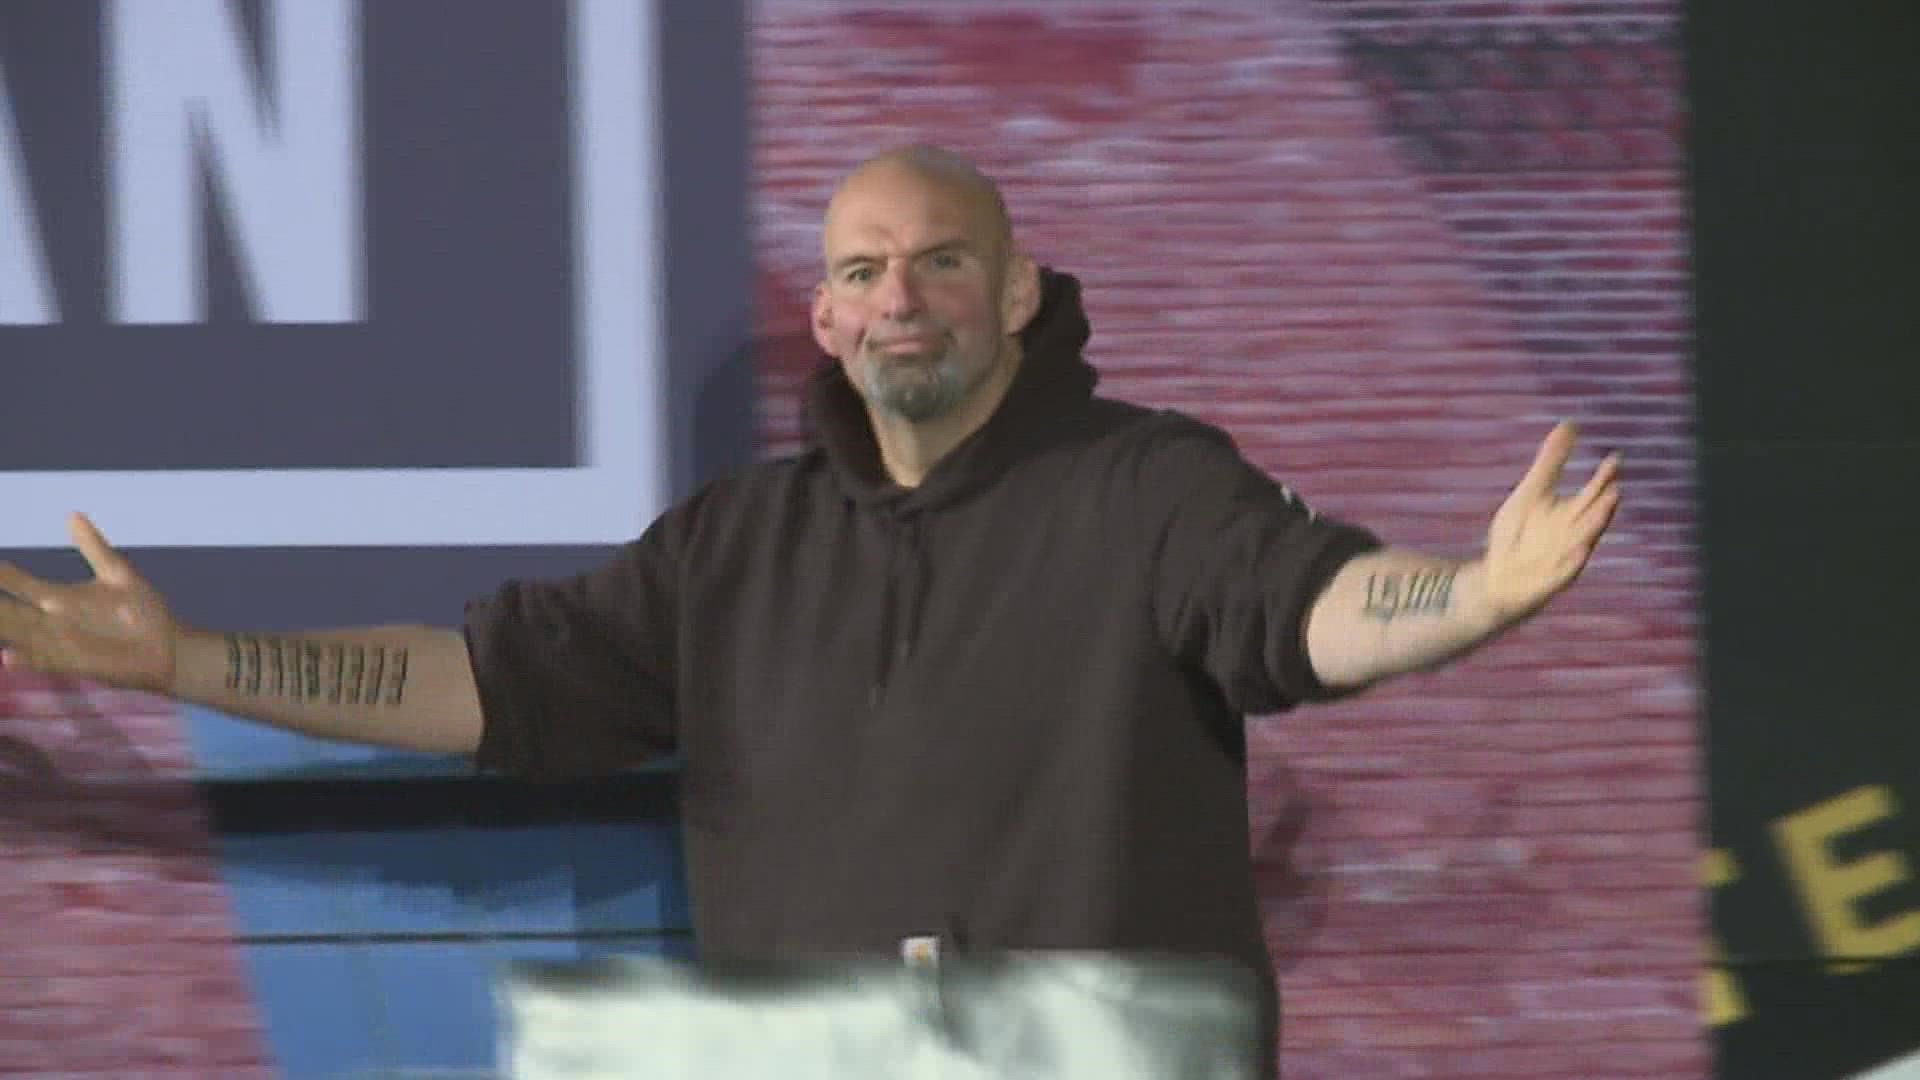 Fetterman took to the stage encouraging people to vote with the midterms just four weeks away